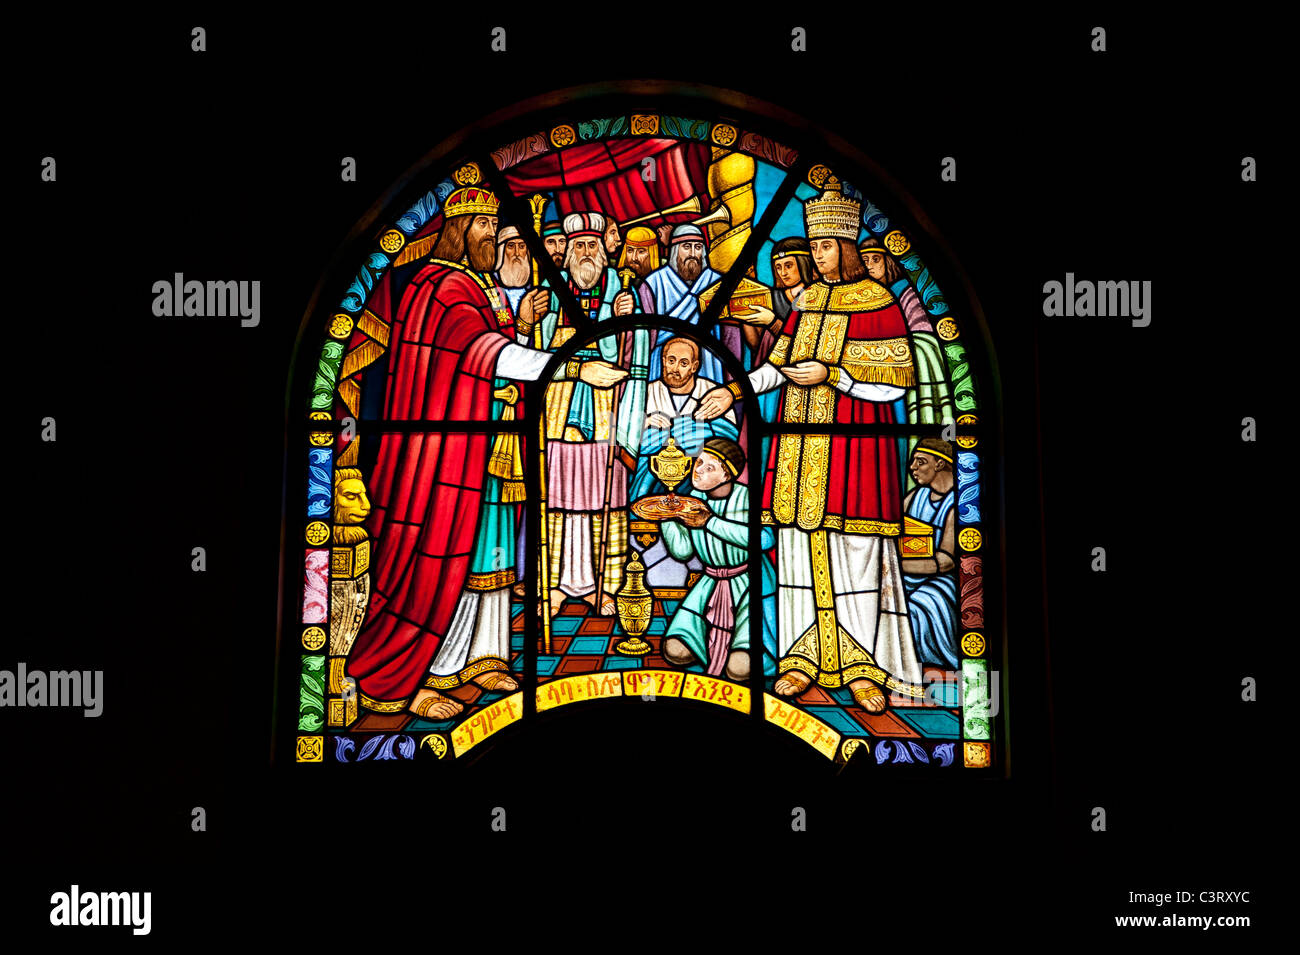 Stained glass window, Kiddist Selassie (Holy Trinity) Cathedral, Addis Ababa, Ethiopia Stock Photo